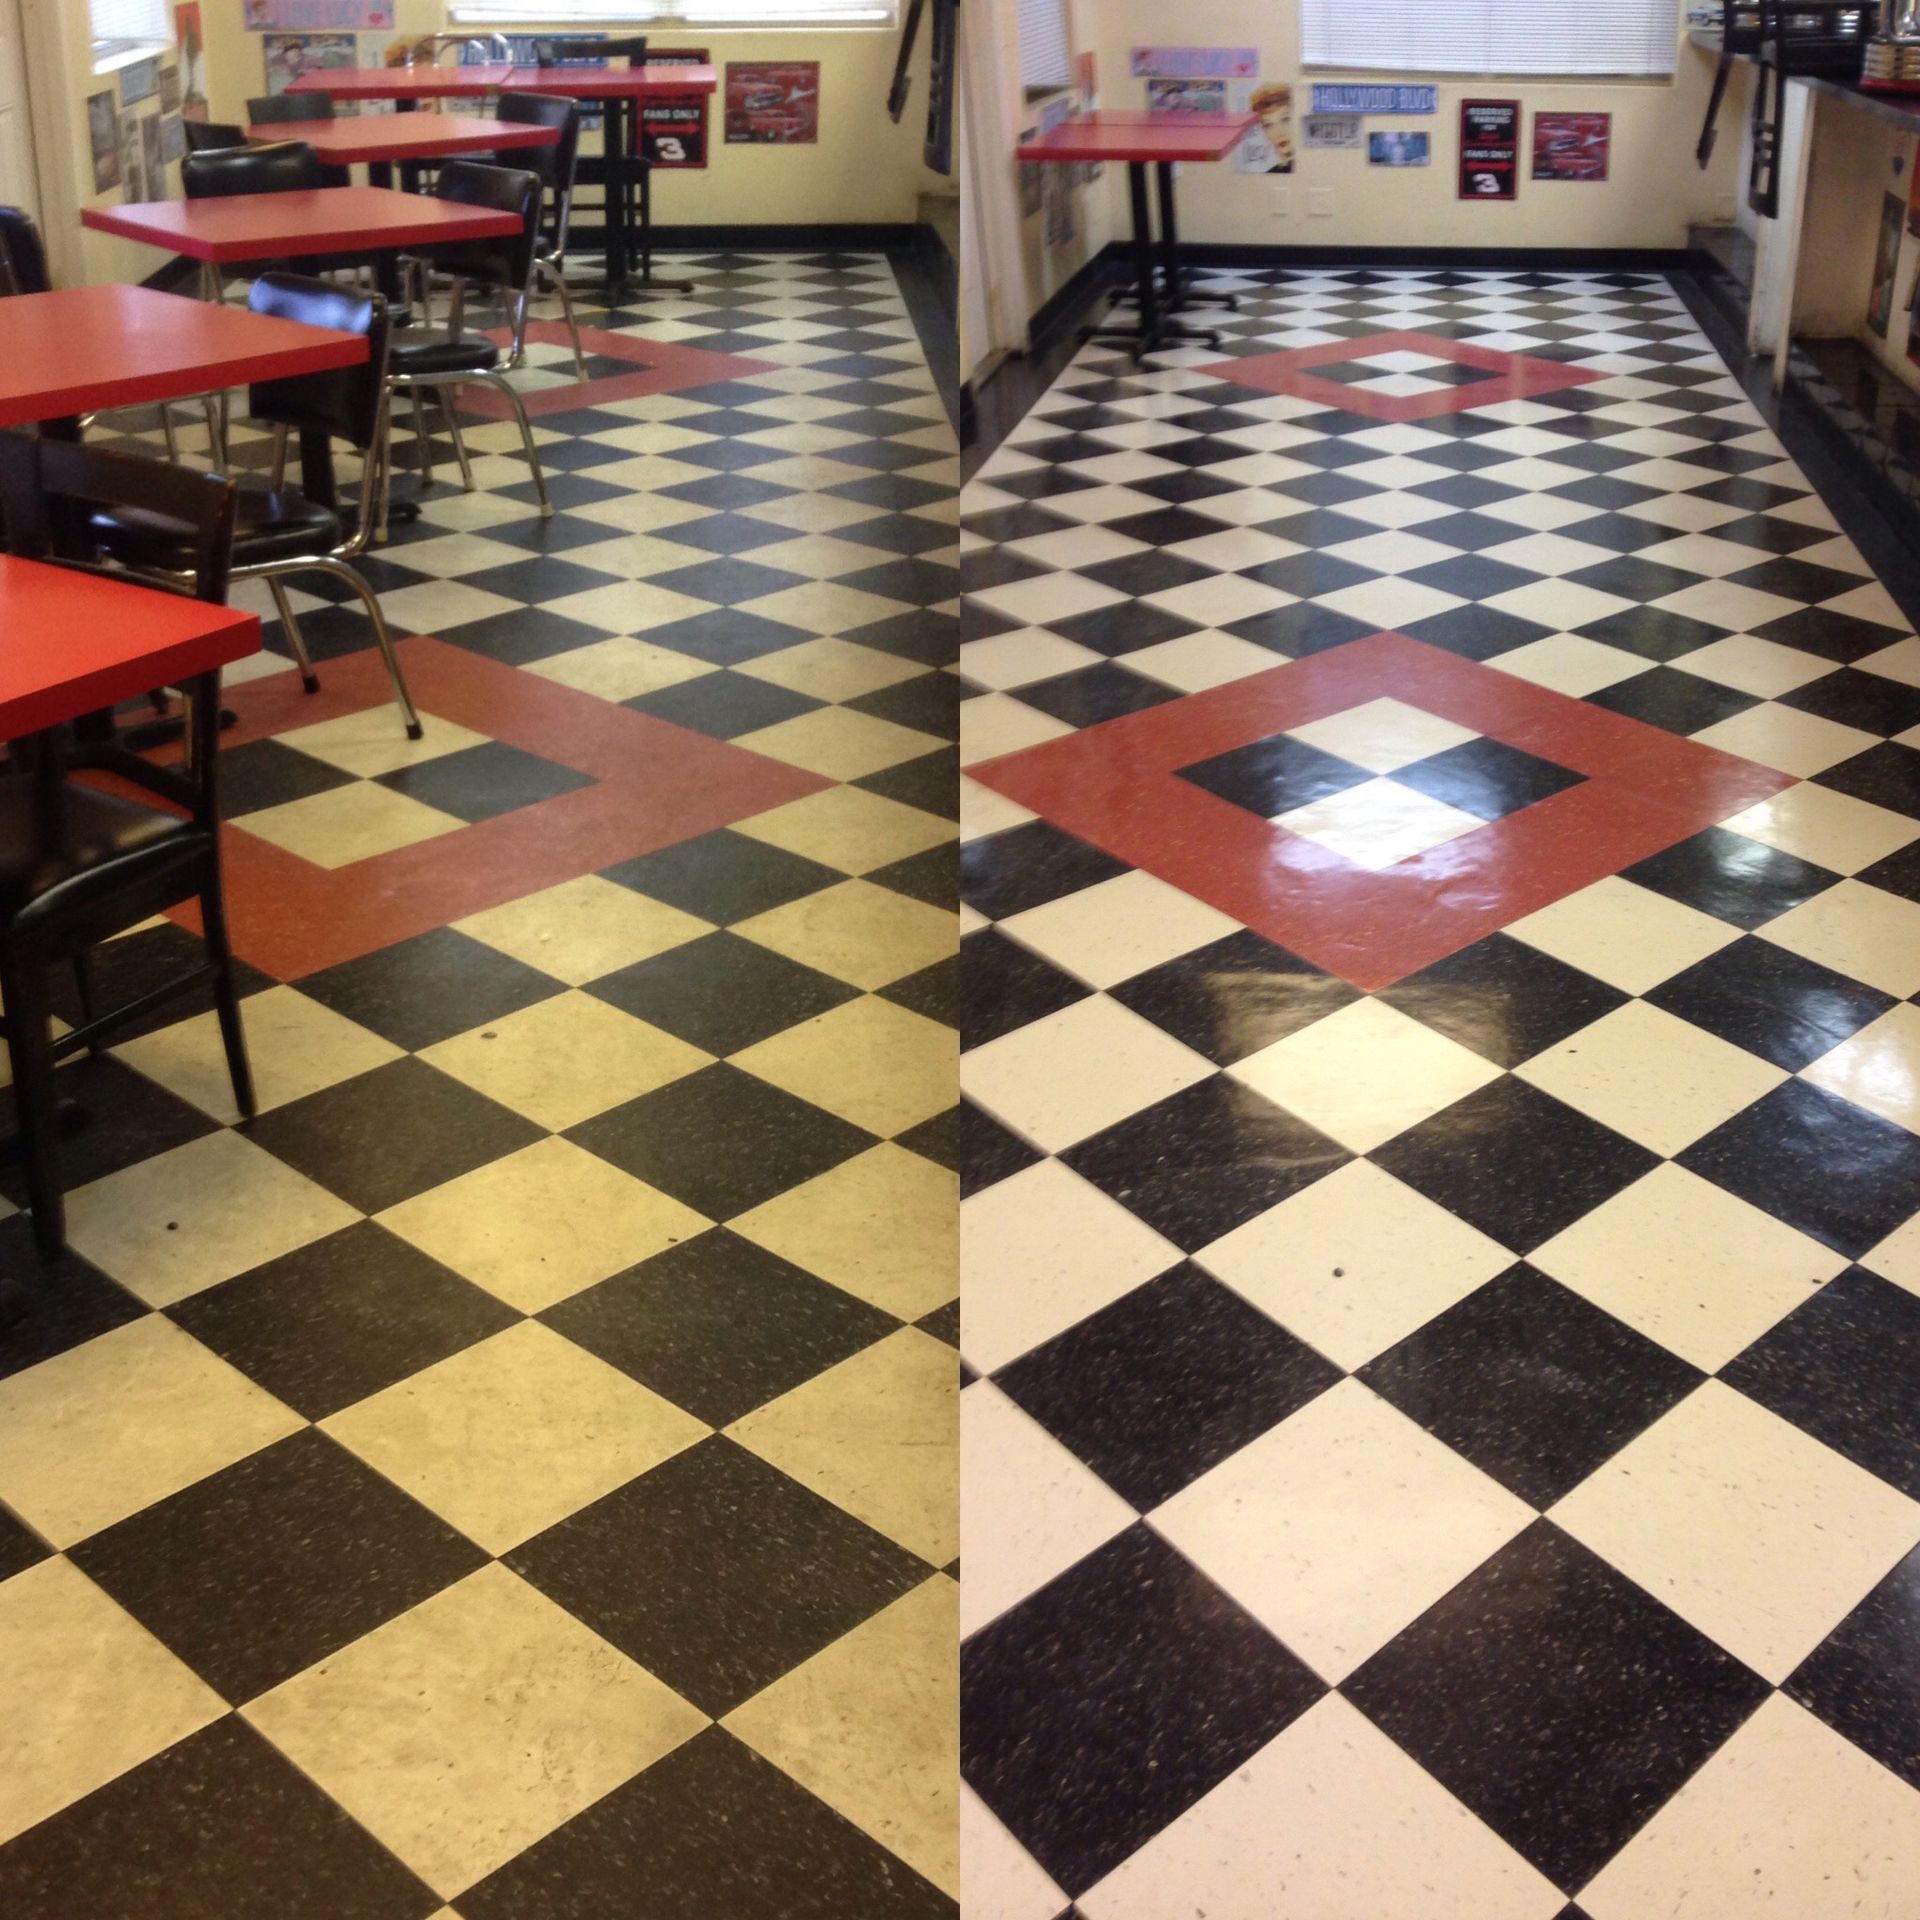 a before and after photo of a checkered floor